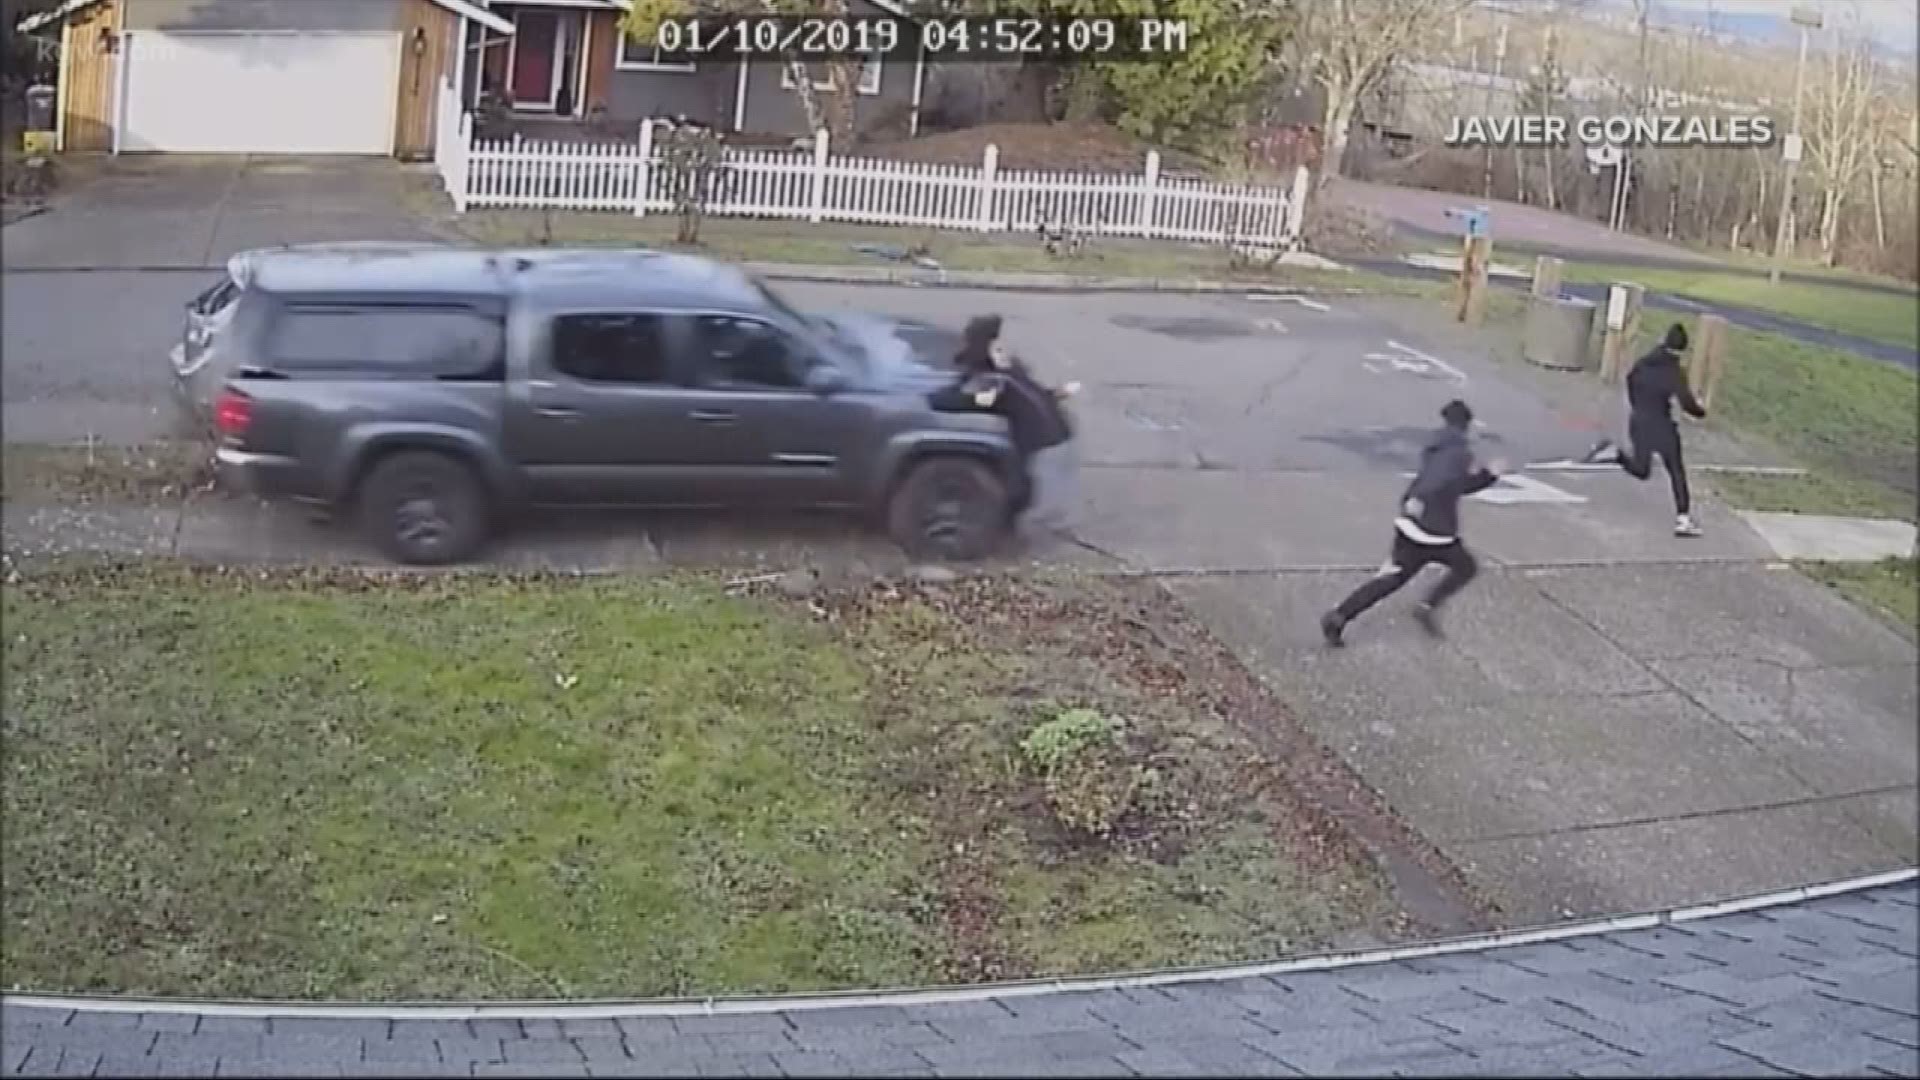 A chilling video shows three people running for their lives as a speeding truck driver chases them in NE Portland.